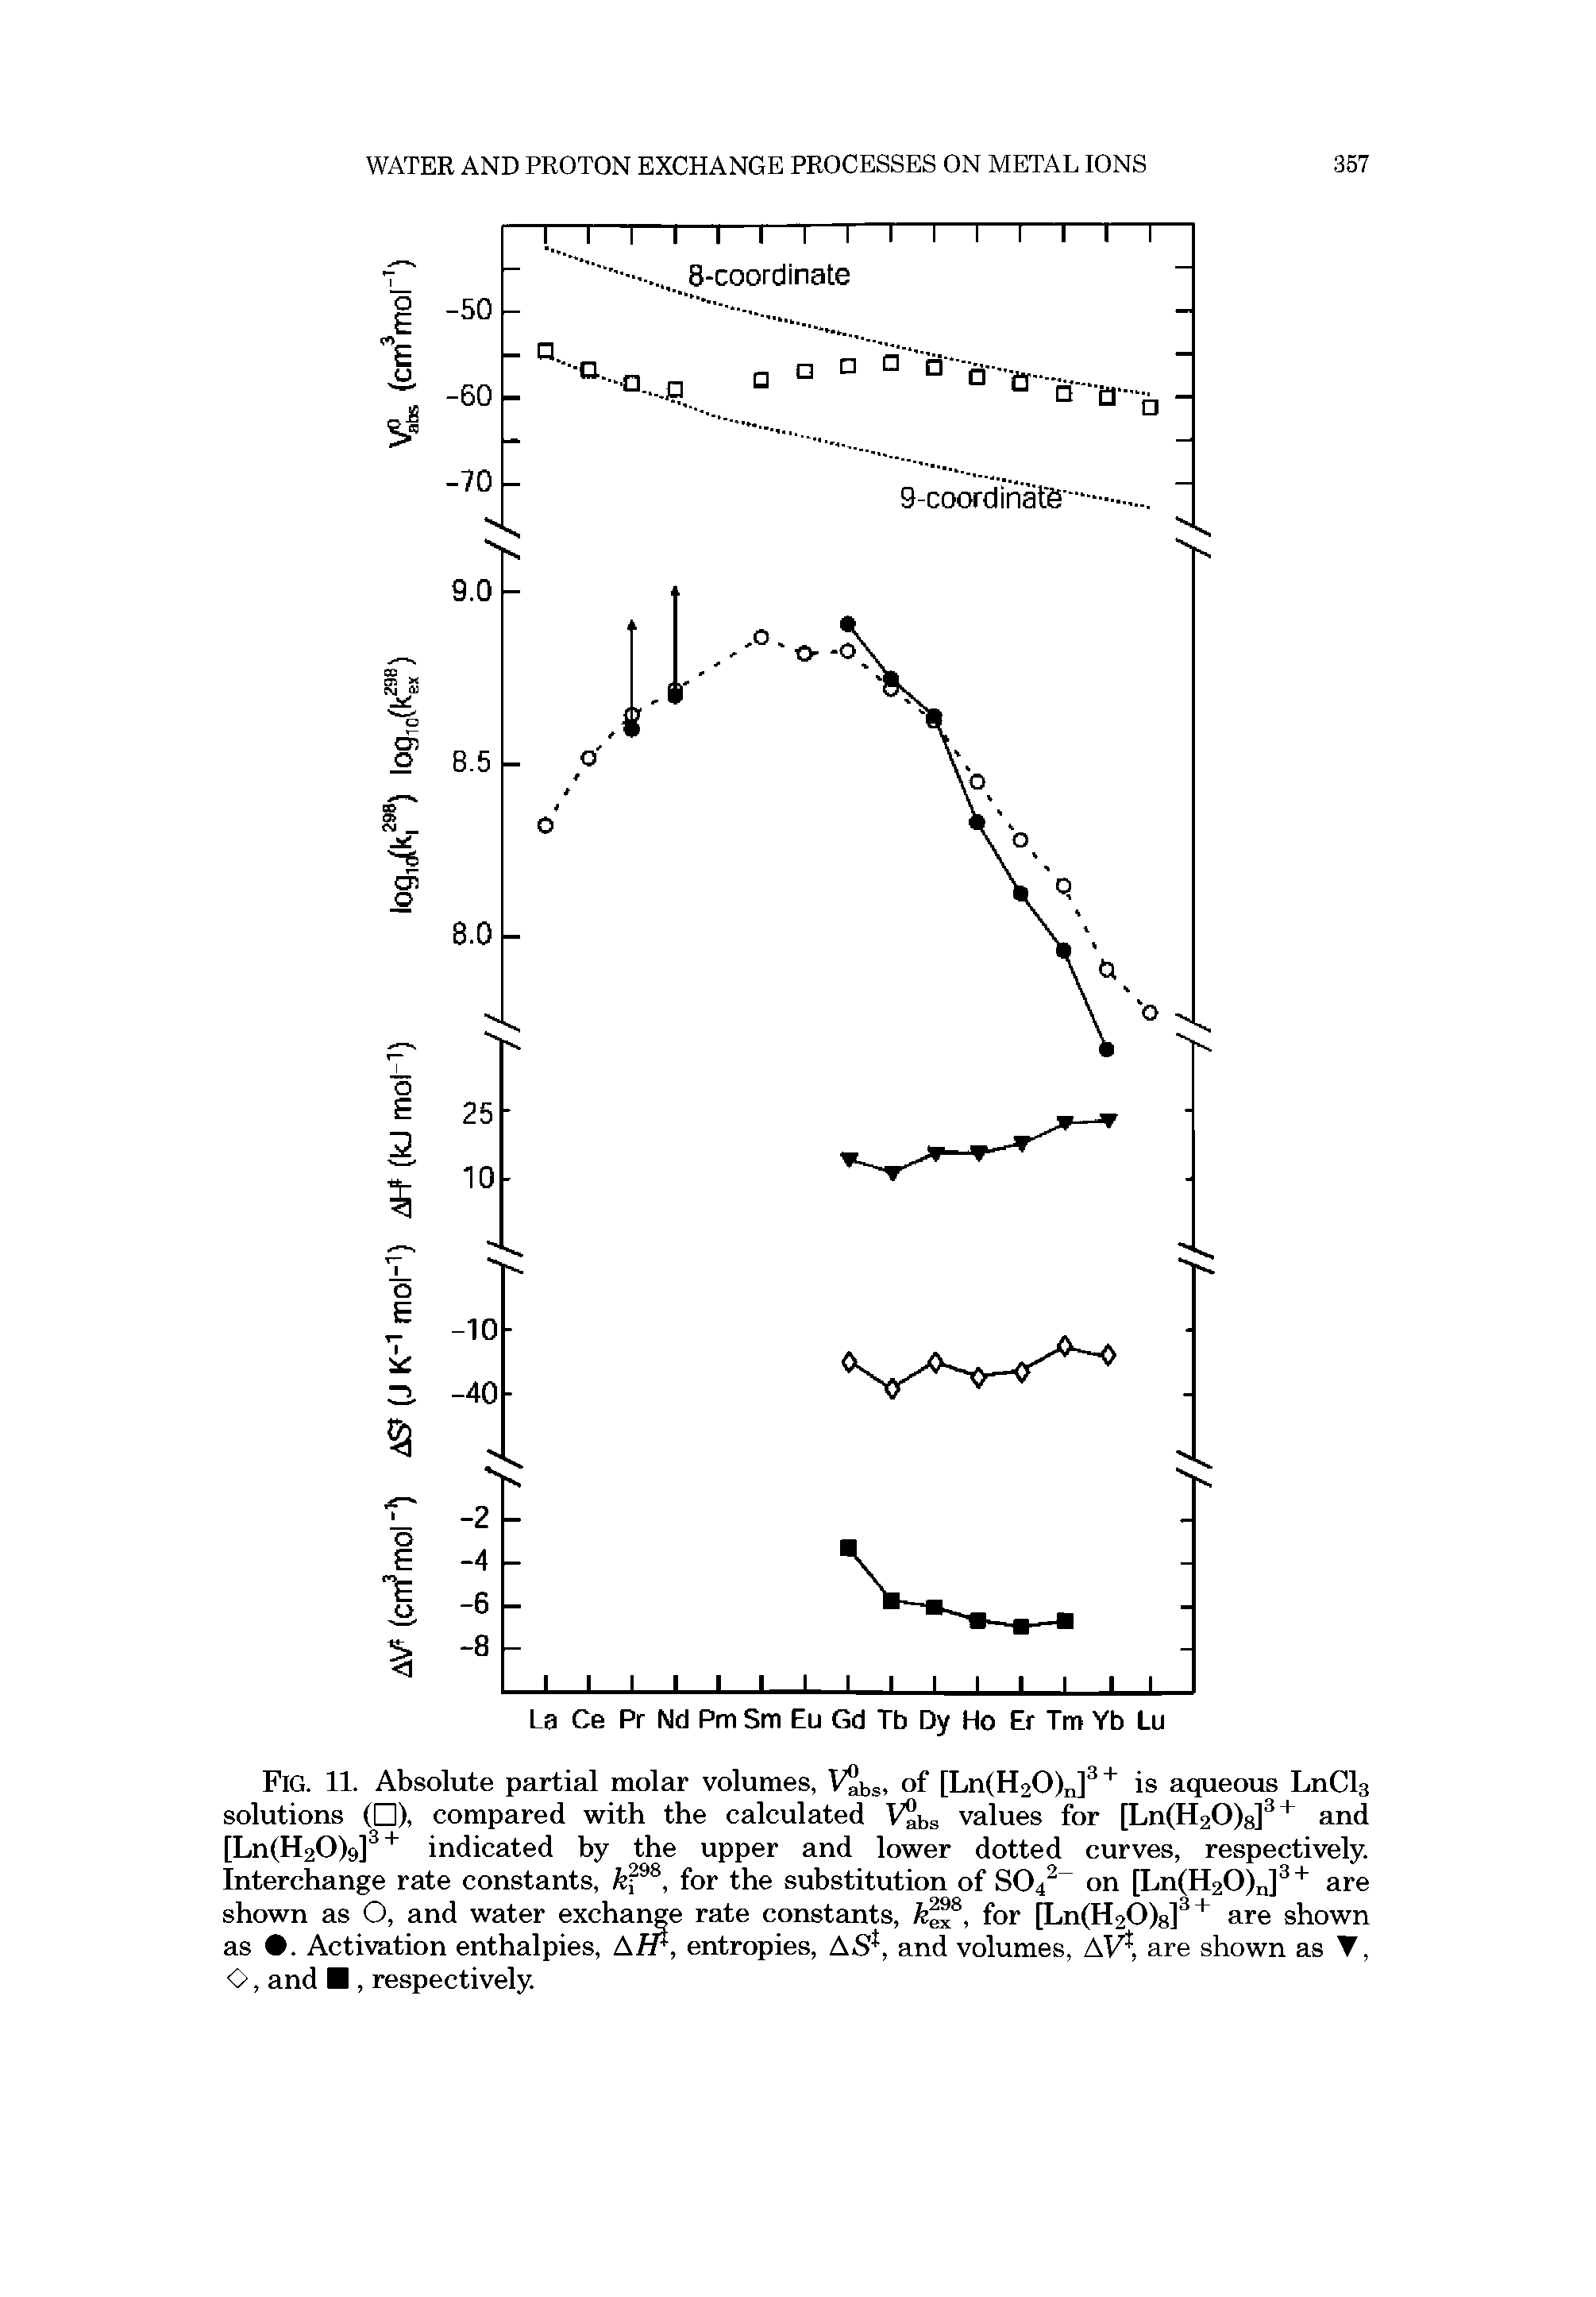 Fig. 11. Absolute partial molar volumes, V bs> of [Ln(H20)n] is aqueous L11CI3 solutions ( ), compared with the calculated V bs values for [Ln(H20)8] and [Ln(H20)9] indicated by the upper and lower dotted curves, respectively. Interchange rate constants, P , for the substitution of S04 on [Ln(H20)J are shown as O, and water exchange rate constants, P , for [Ln(H20)8] are shown as . Activation enthalpies, A/r, entropies, AS, and volumes, AV, are shown as T, O, and , respectively.